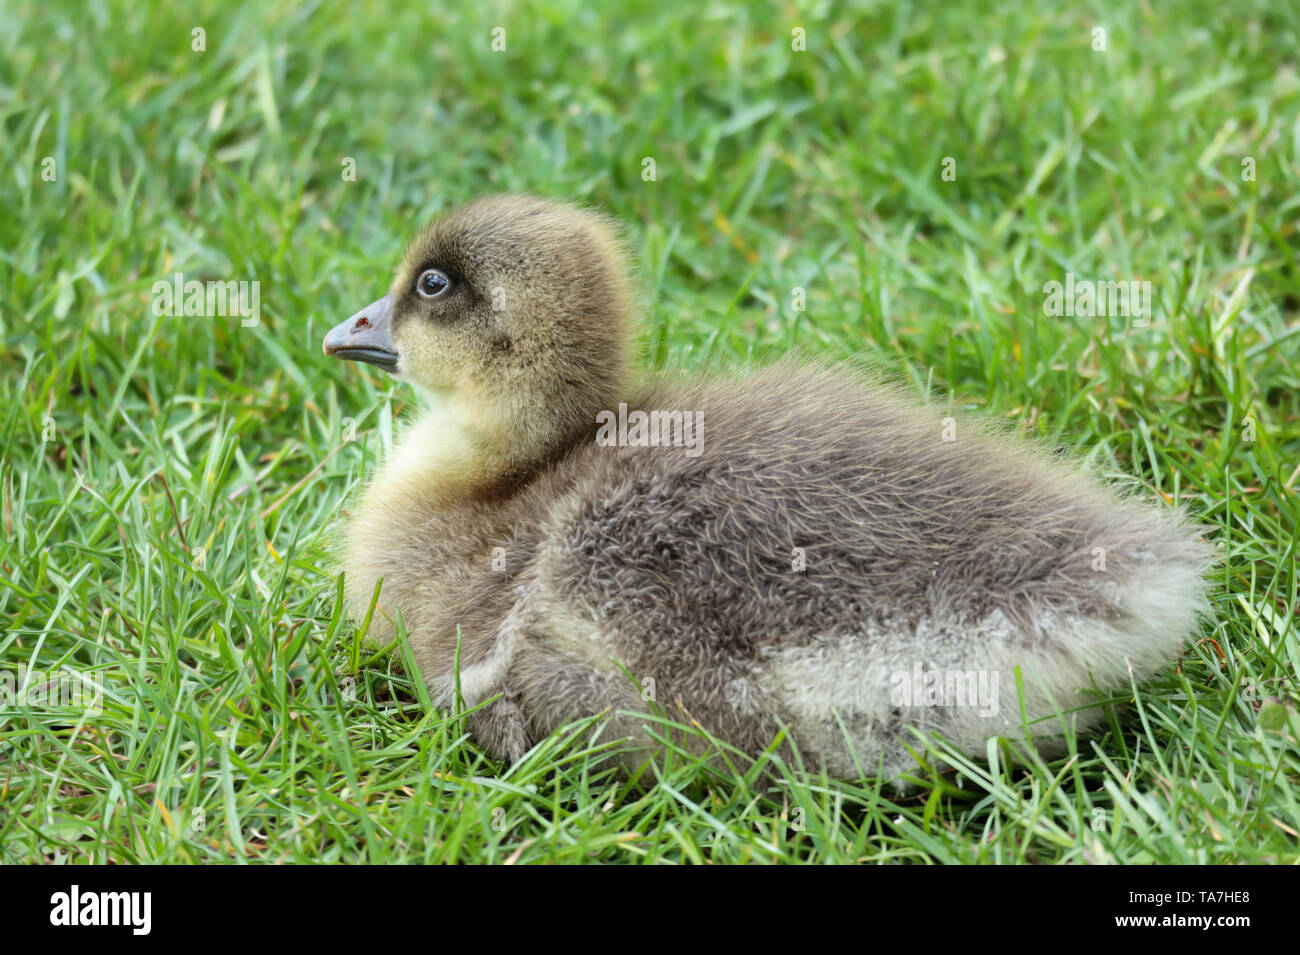 A Greylag Goose's gosling resting in the grass, one of many born at Sandall Park, Doncaster, UK in May 2019 Stock Photo